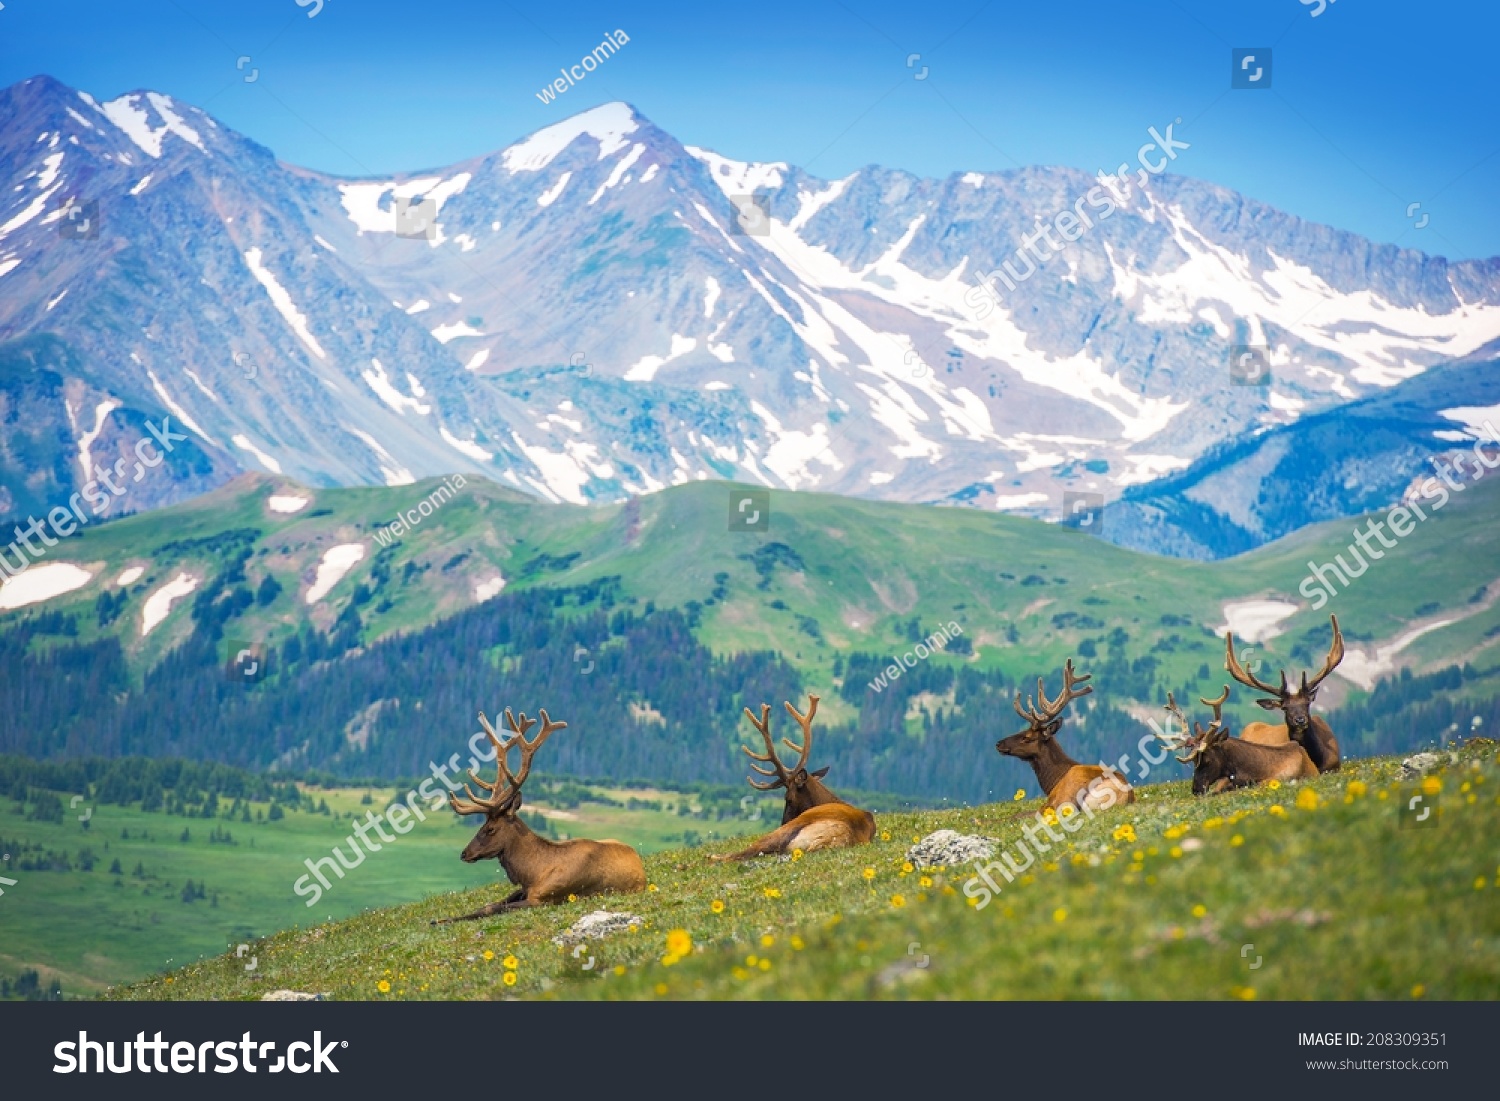 North American Elks on the Rocky Mountain Meadow in Colorado, United States. Resting Elks #208309351